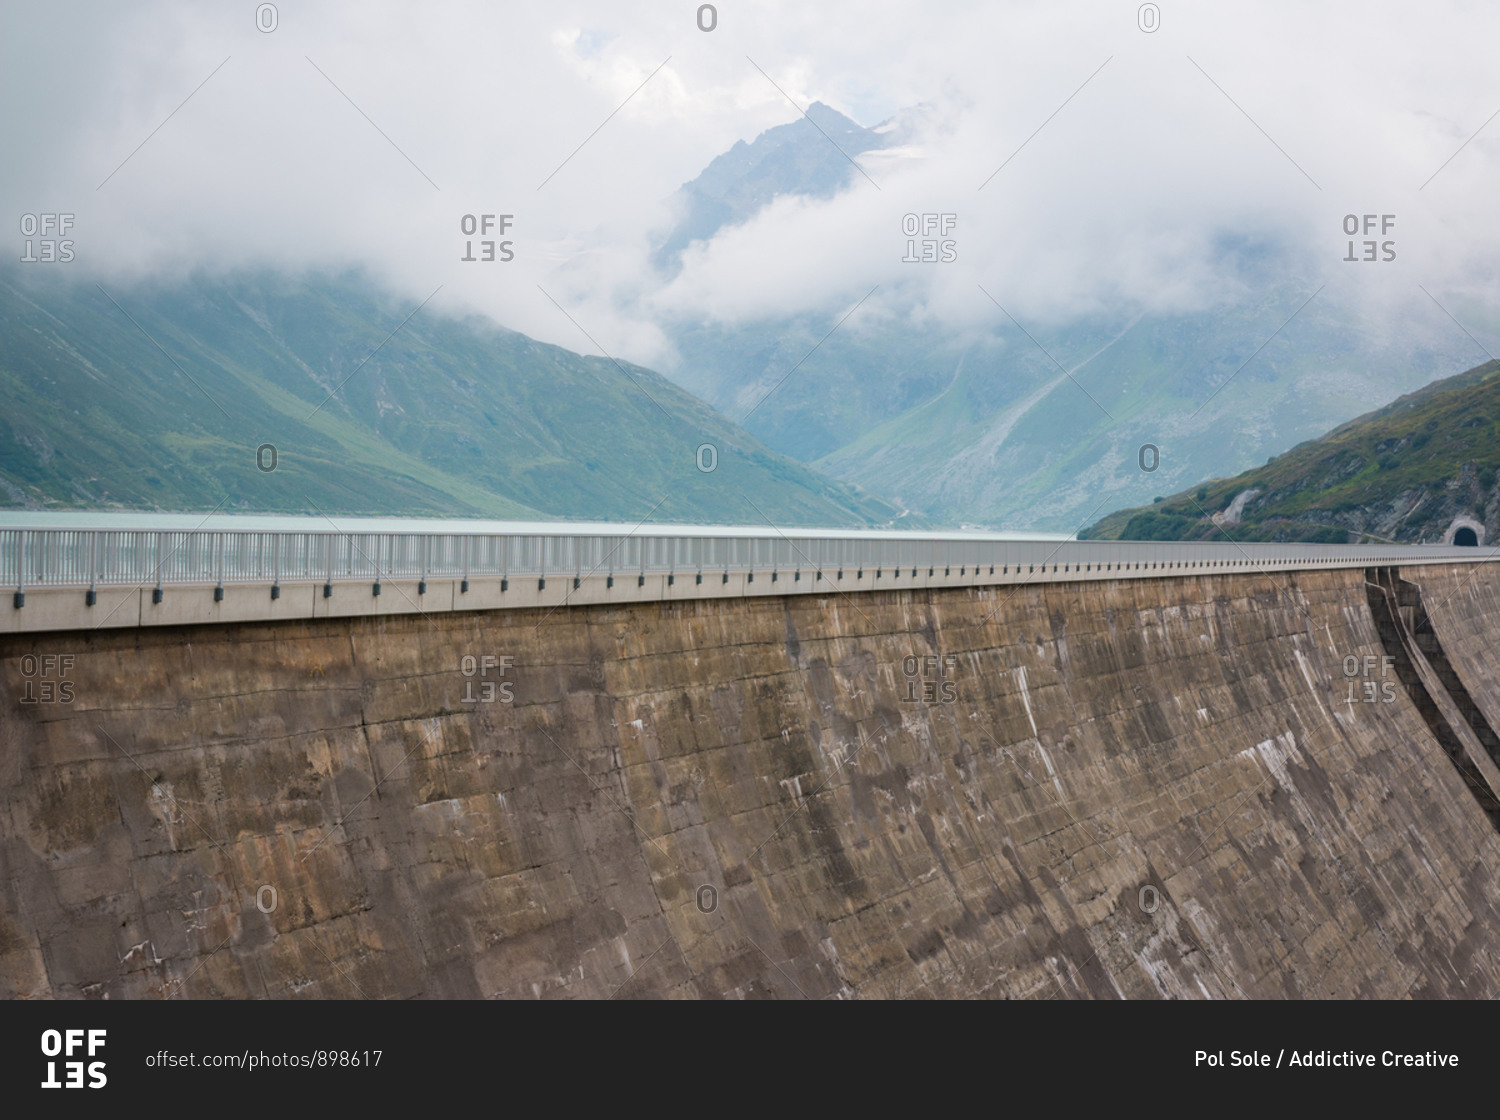 High alpine road on big dam on background with misty cloudy mountains in Austria